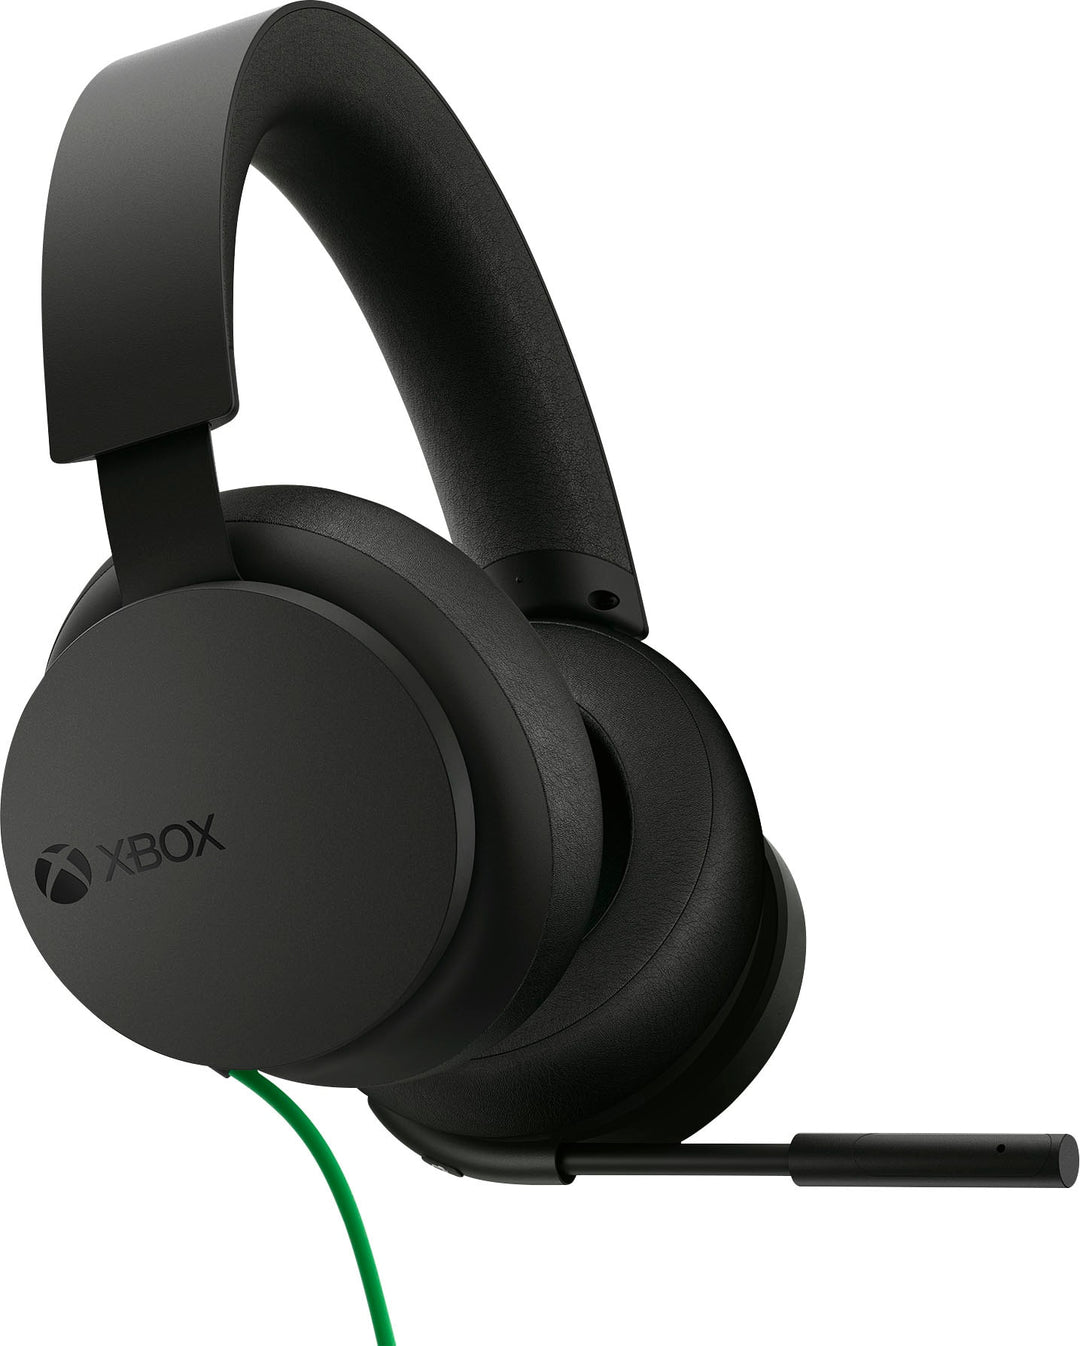 Microsoft - Xbox Stereo Headset for Xbox Series X|S, Xbox One, and Windows 10/11 Devices - Black_0